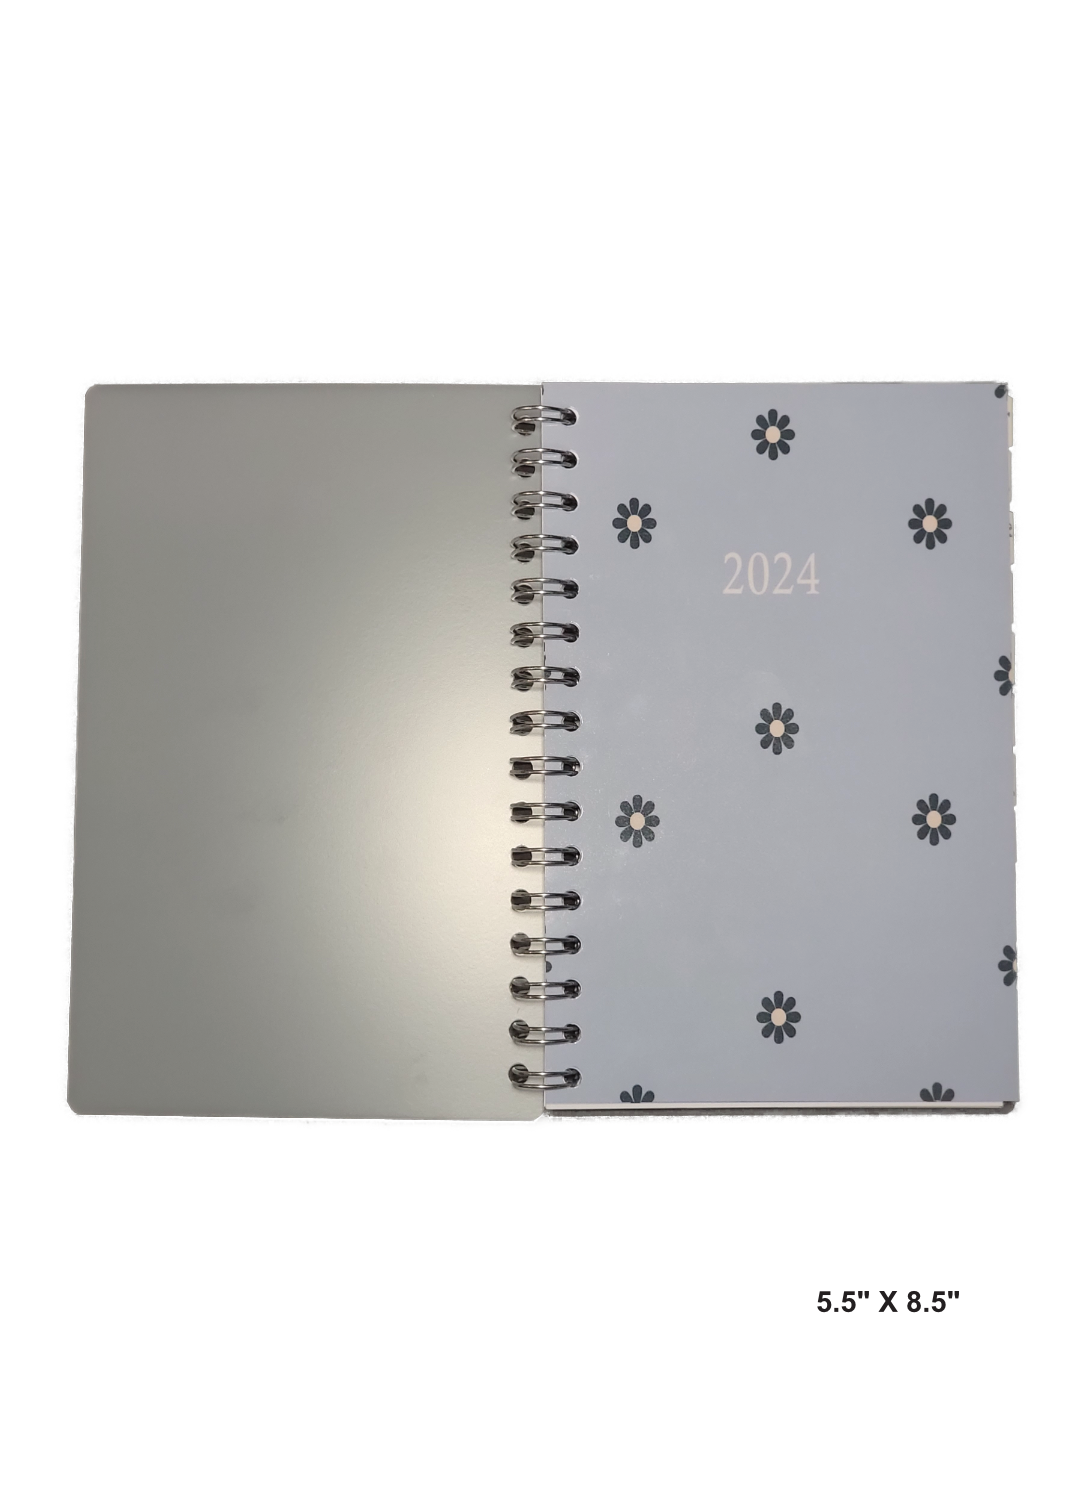 Image of a hand-made 5.5" x 8.5" 12-month planner with blue flowers and light blue background cover. Great for planning and organization. 